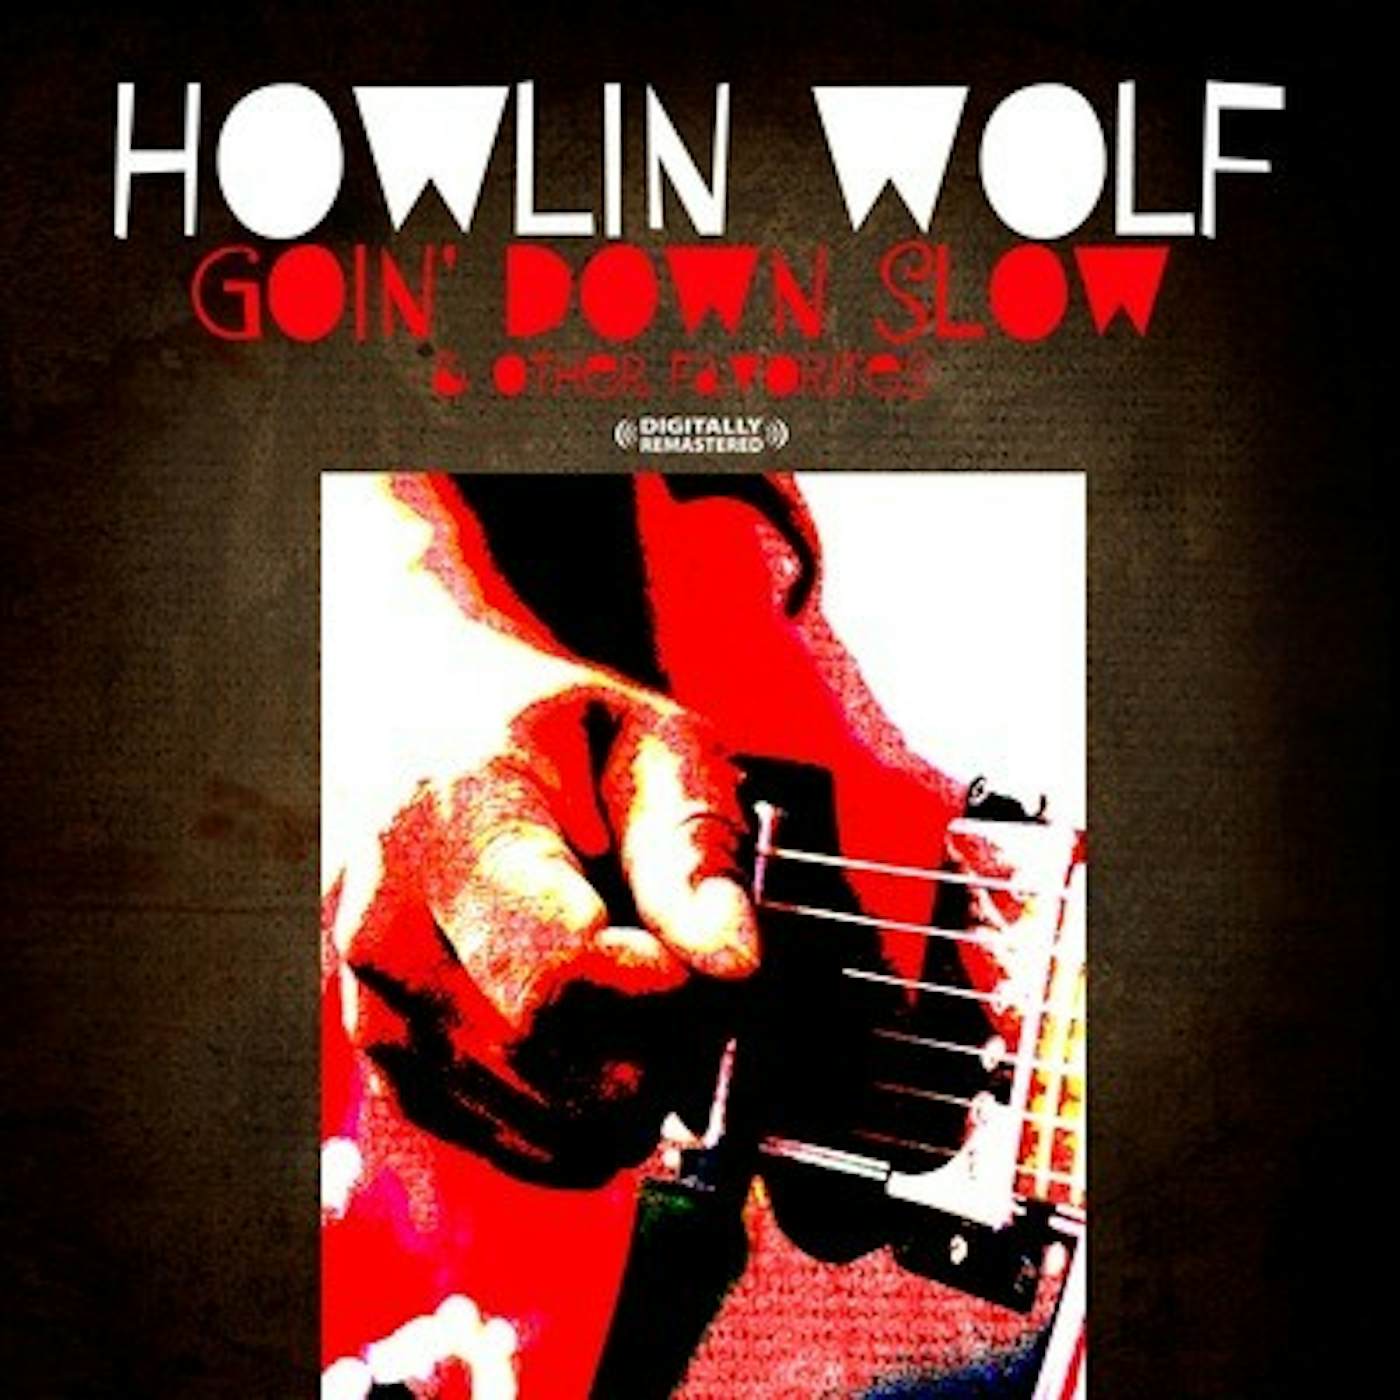 Howlin' Wolf GOIN' DOWN SLOW & OTHER FAVORITES CD